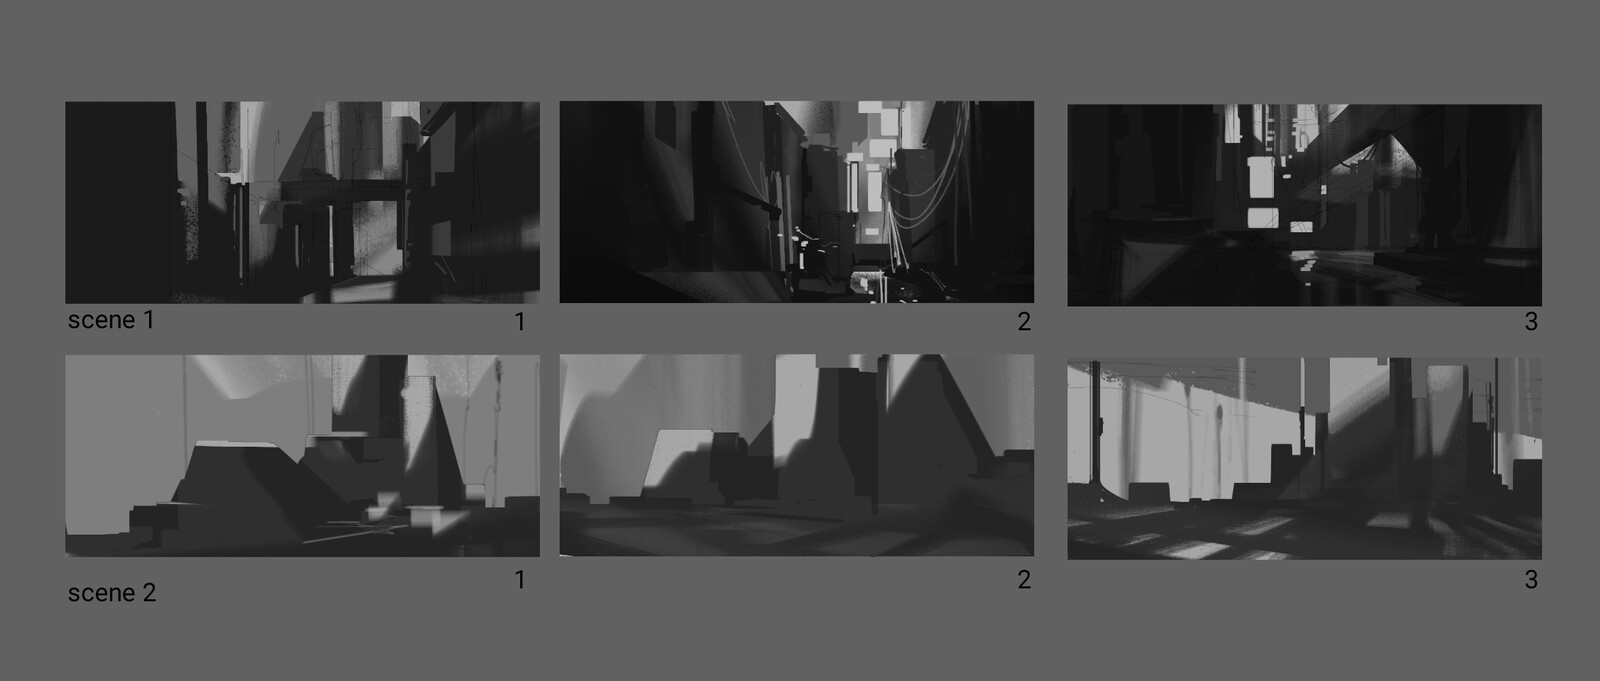 Sketches for the Narrative Trailer Illustrations-1